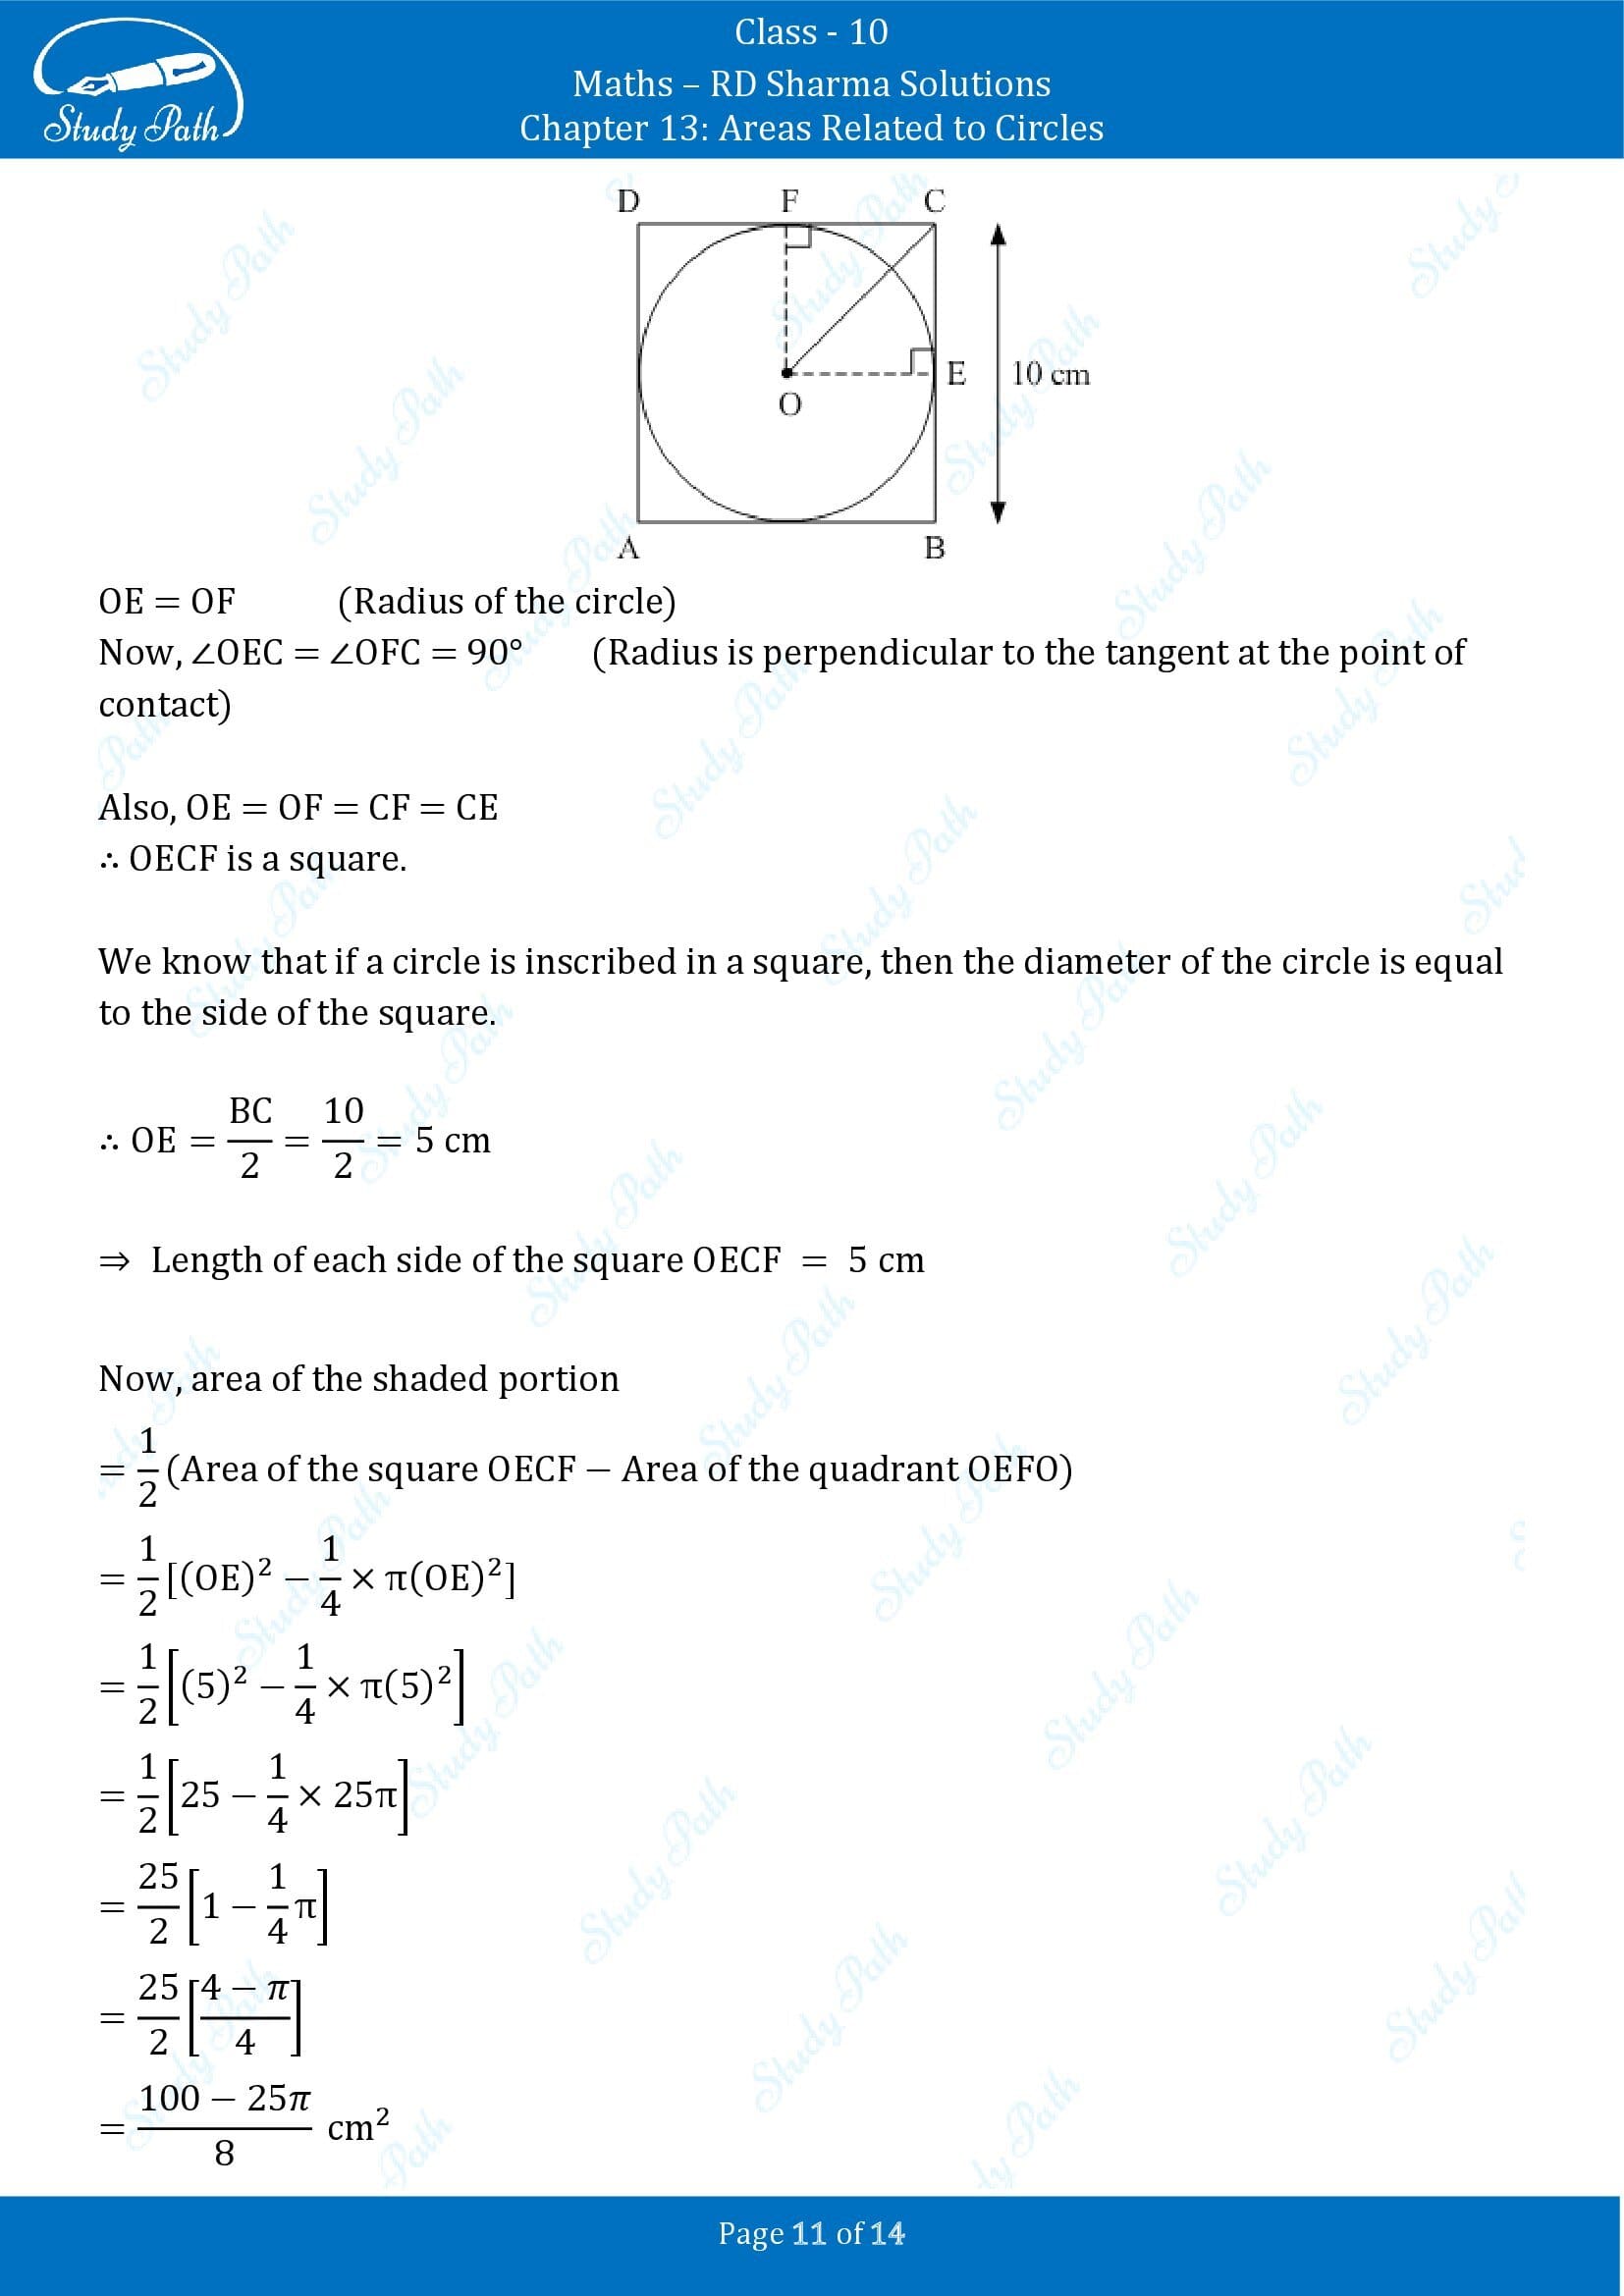 RD Sharma Solutions Class 10 Chapter 13 Areas Related to Circles Fill in the Blank Type Questions FBQs 00011